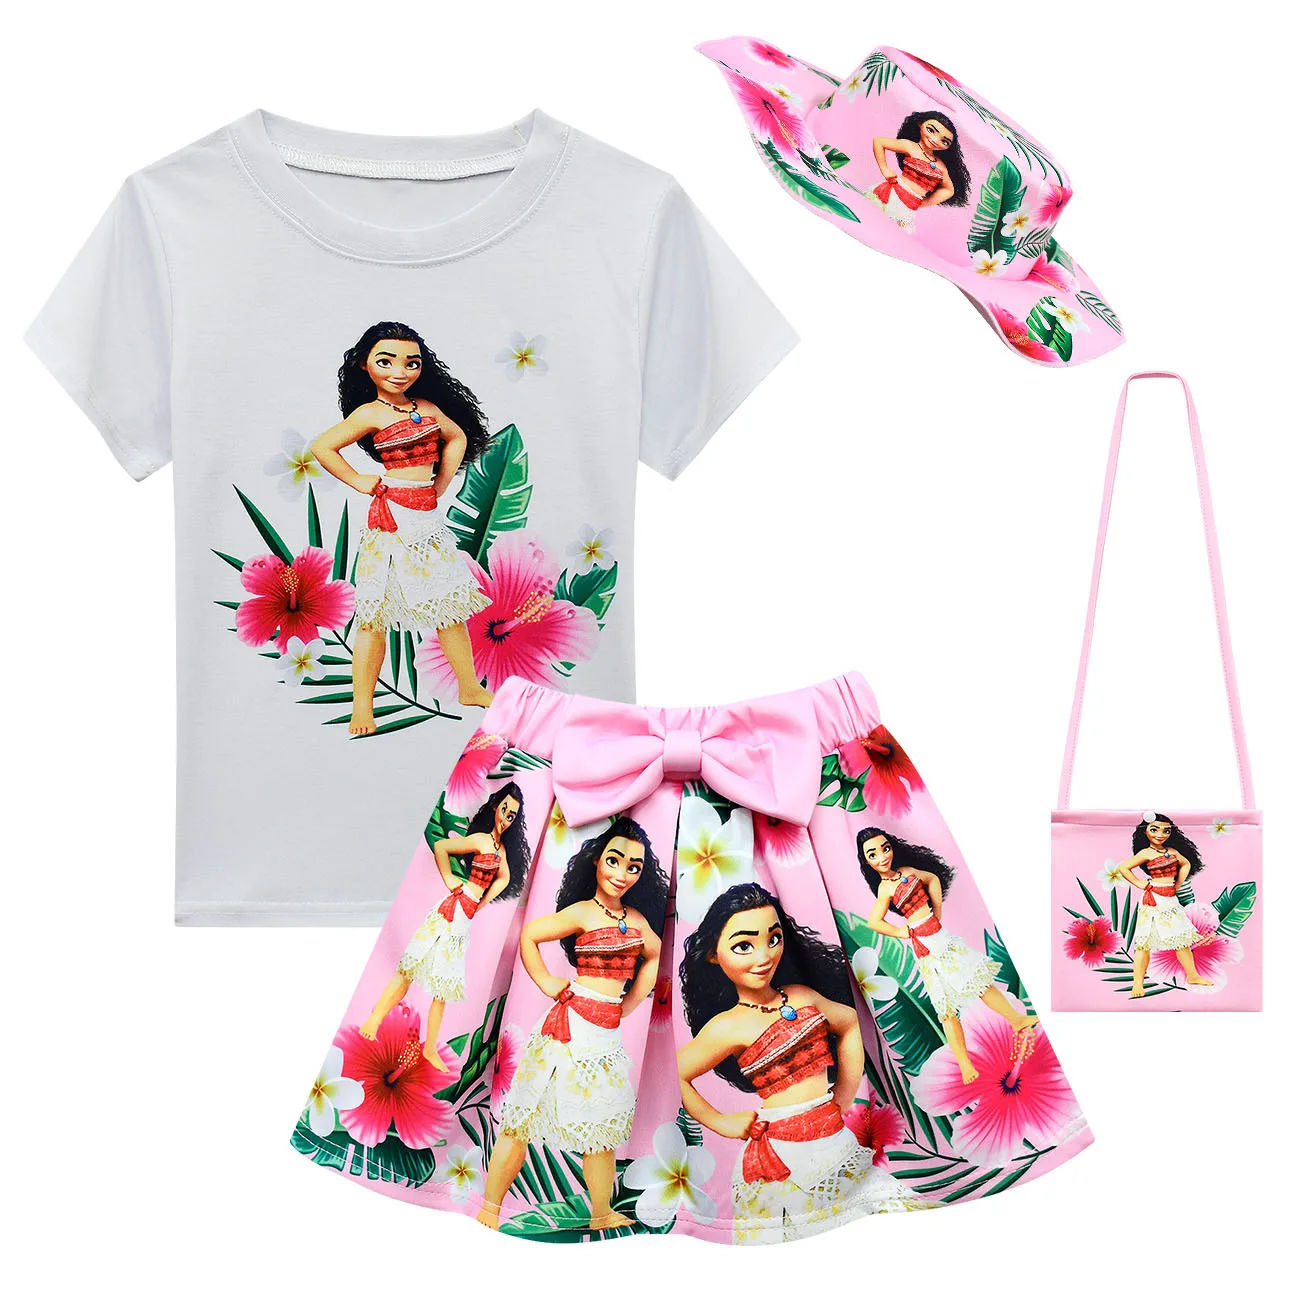 Kids Clothes Sets Moana Costume Summer Girls Short Sleeve T-shirt Skirt Bag Hat 4pcs Birthday Party Decoration Children Outfits